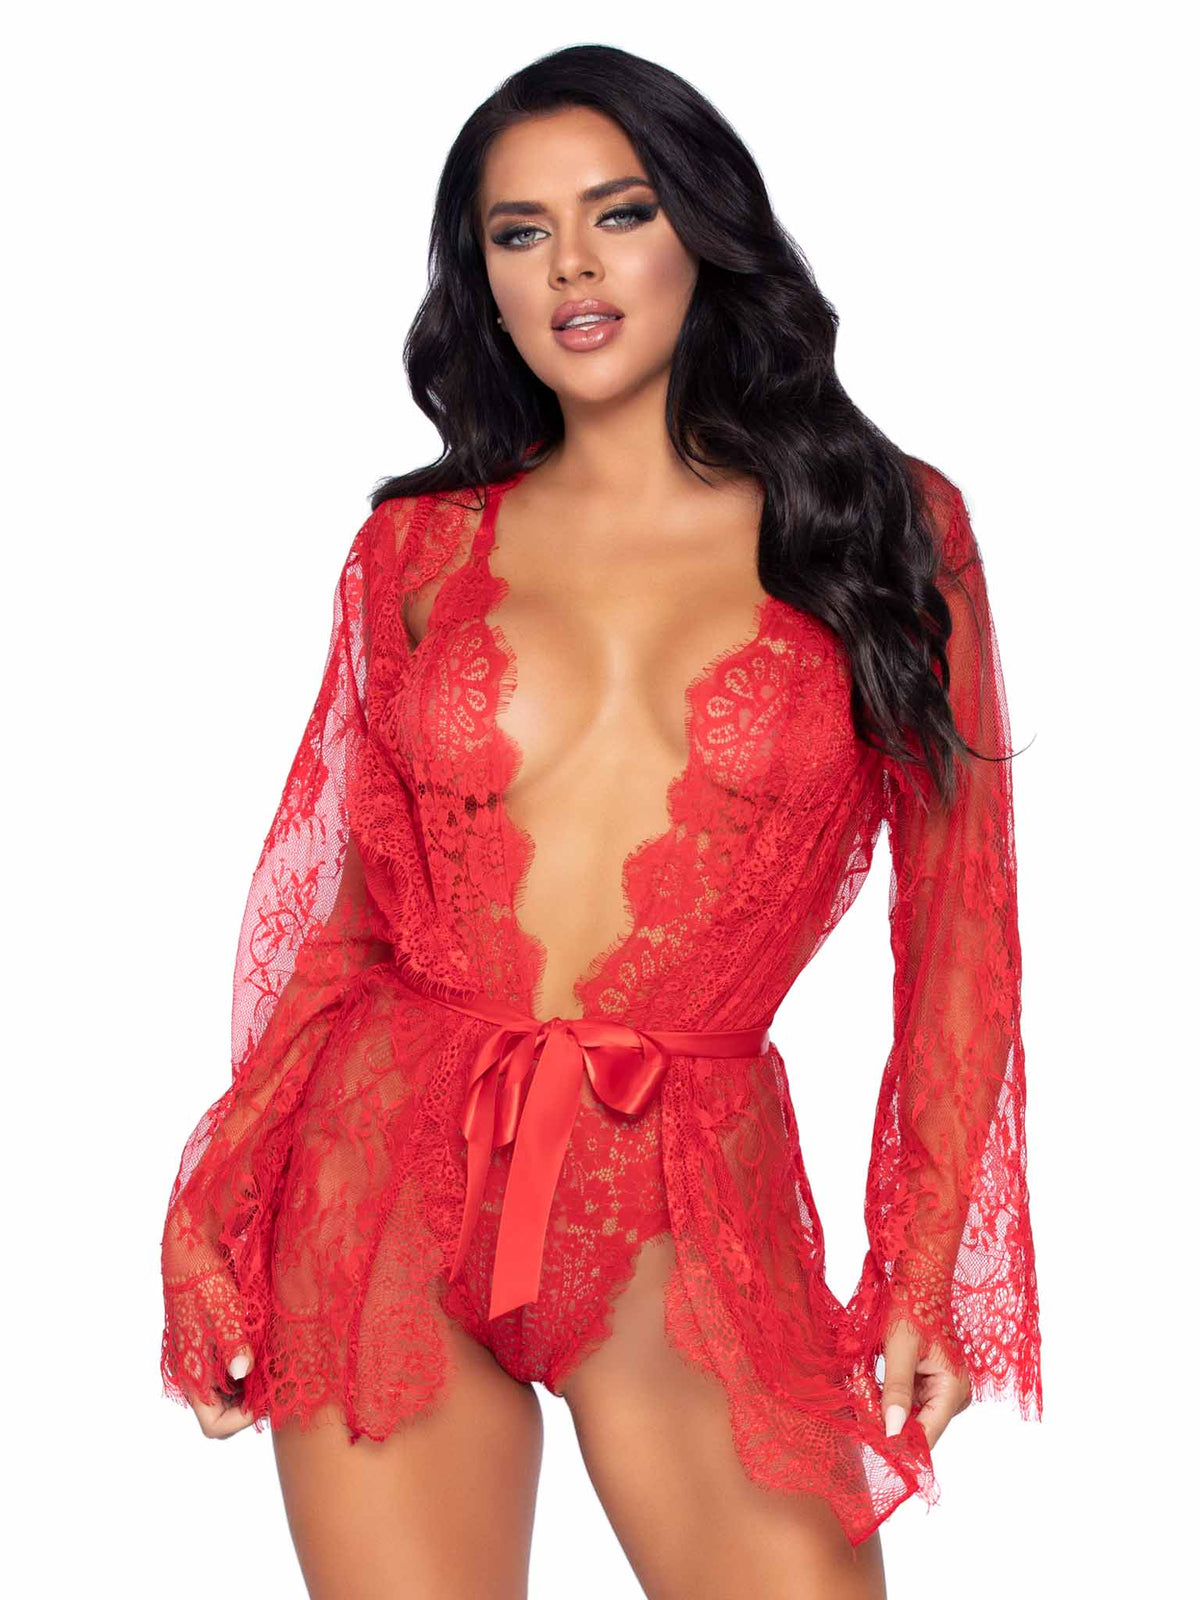 3 Pc Lace Teddy, Matching Robe and Tie Red - Model Express Vancouver